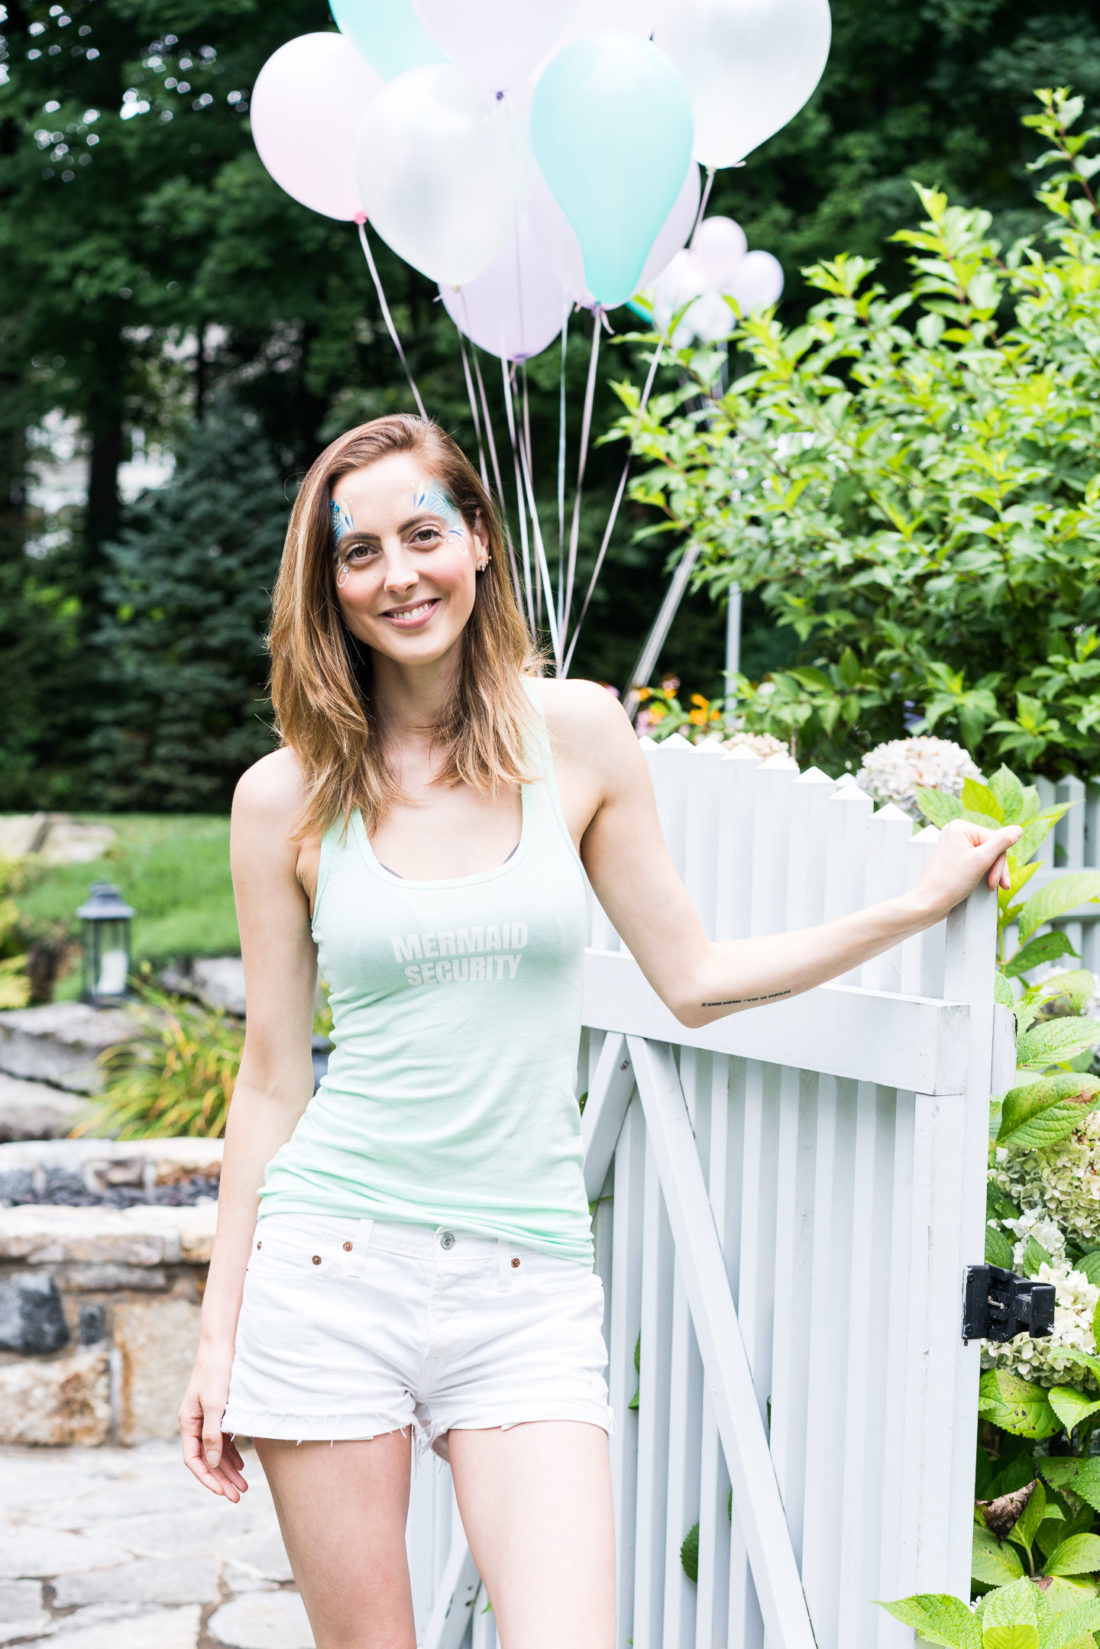 Eva Amurri Martino wears a Mermaid Sercurity tank designed using the Happily App and greets guests at her daughter's third birthday party